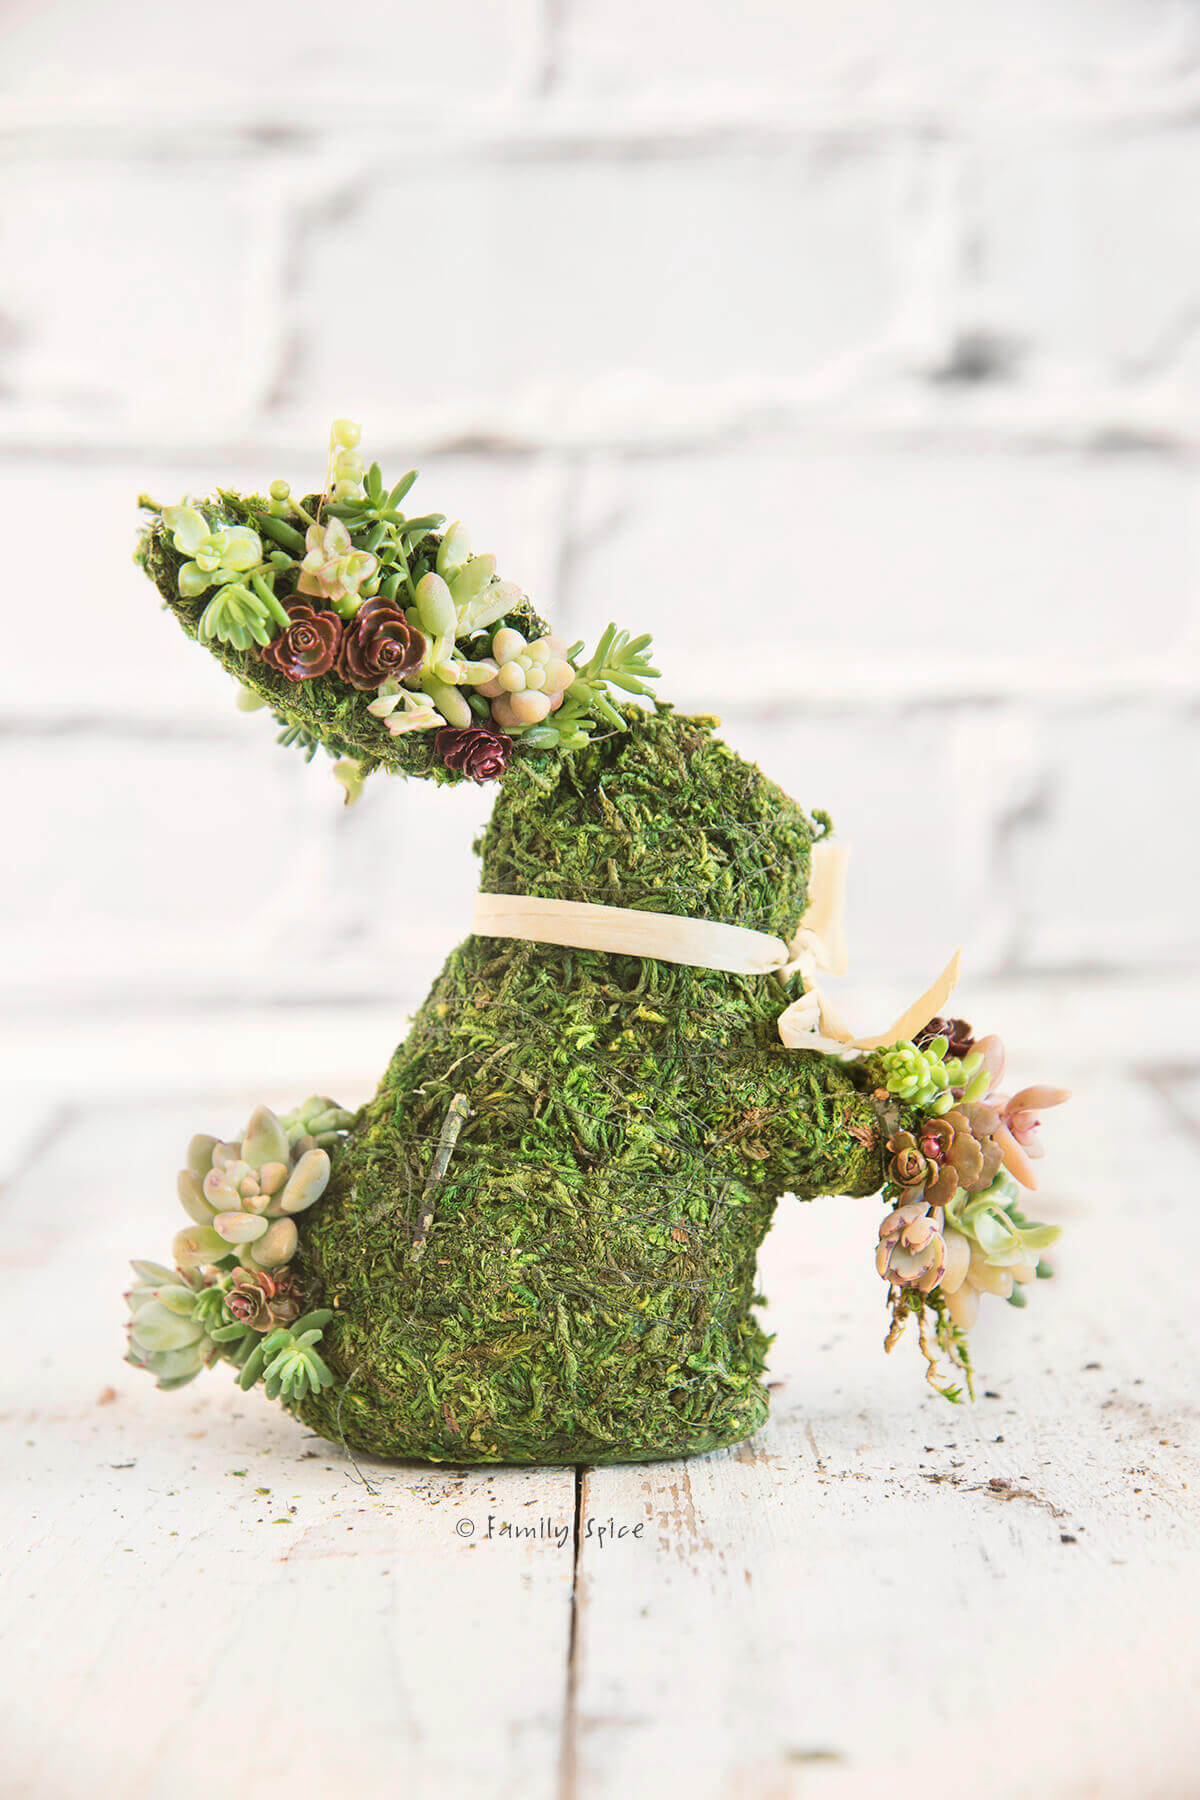 Bunny Craft: DIY Moss Covered Succulent Bunnies for Spring